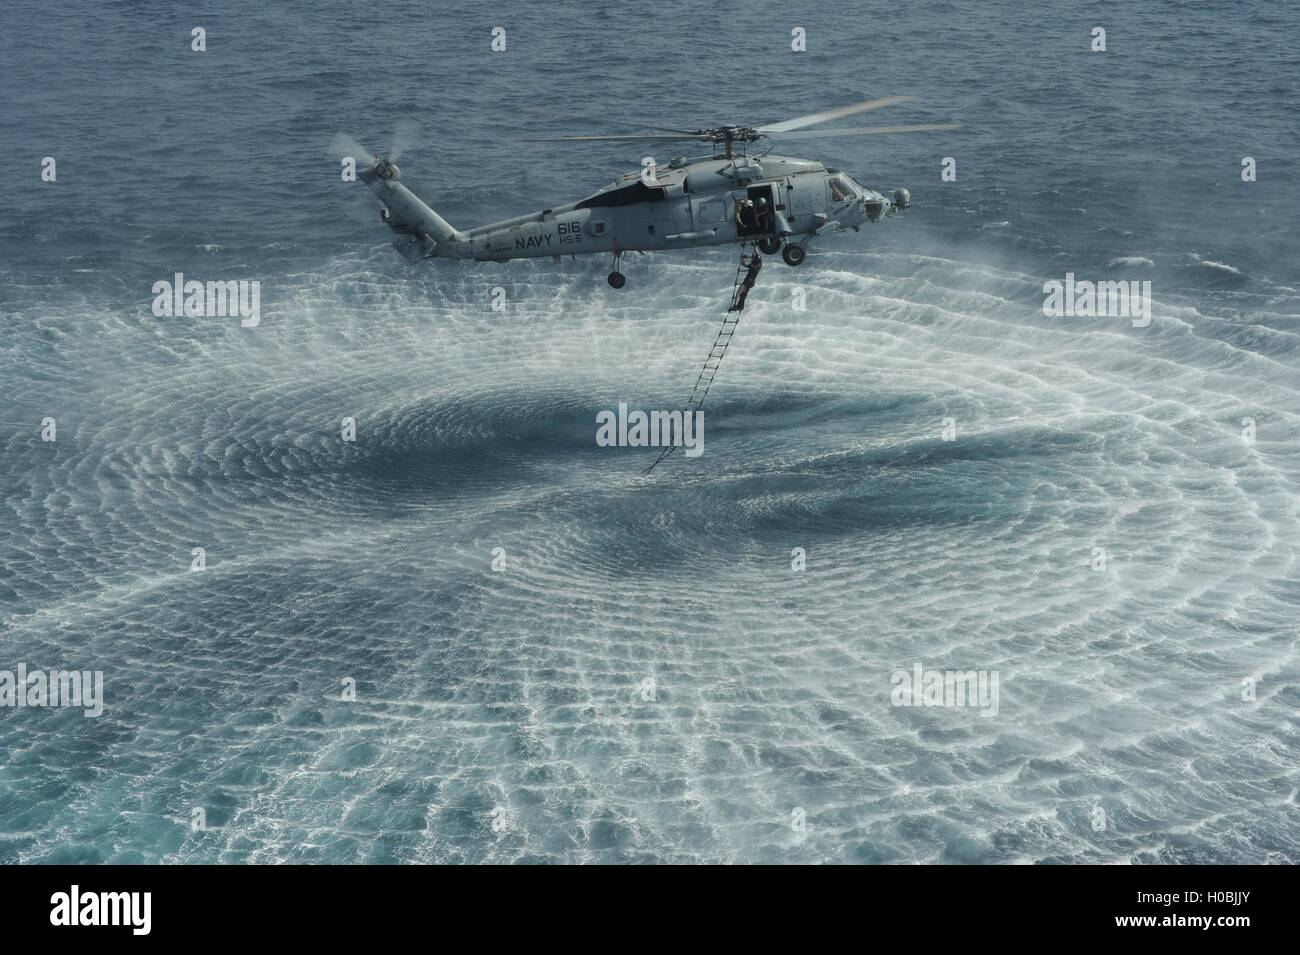 U.S. Navy special forces EOD commandos during a ladder recovery exercise at sea from an HH-60H Seahawk helicopter September 22, 2012 in the Arabian Sea. Stock Photo